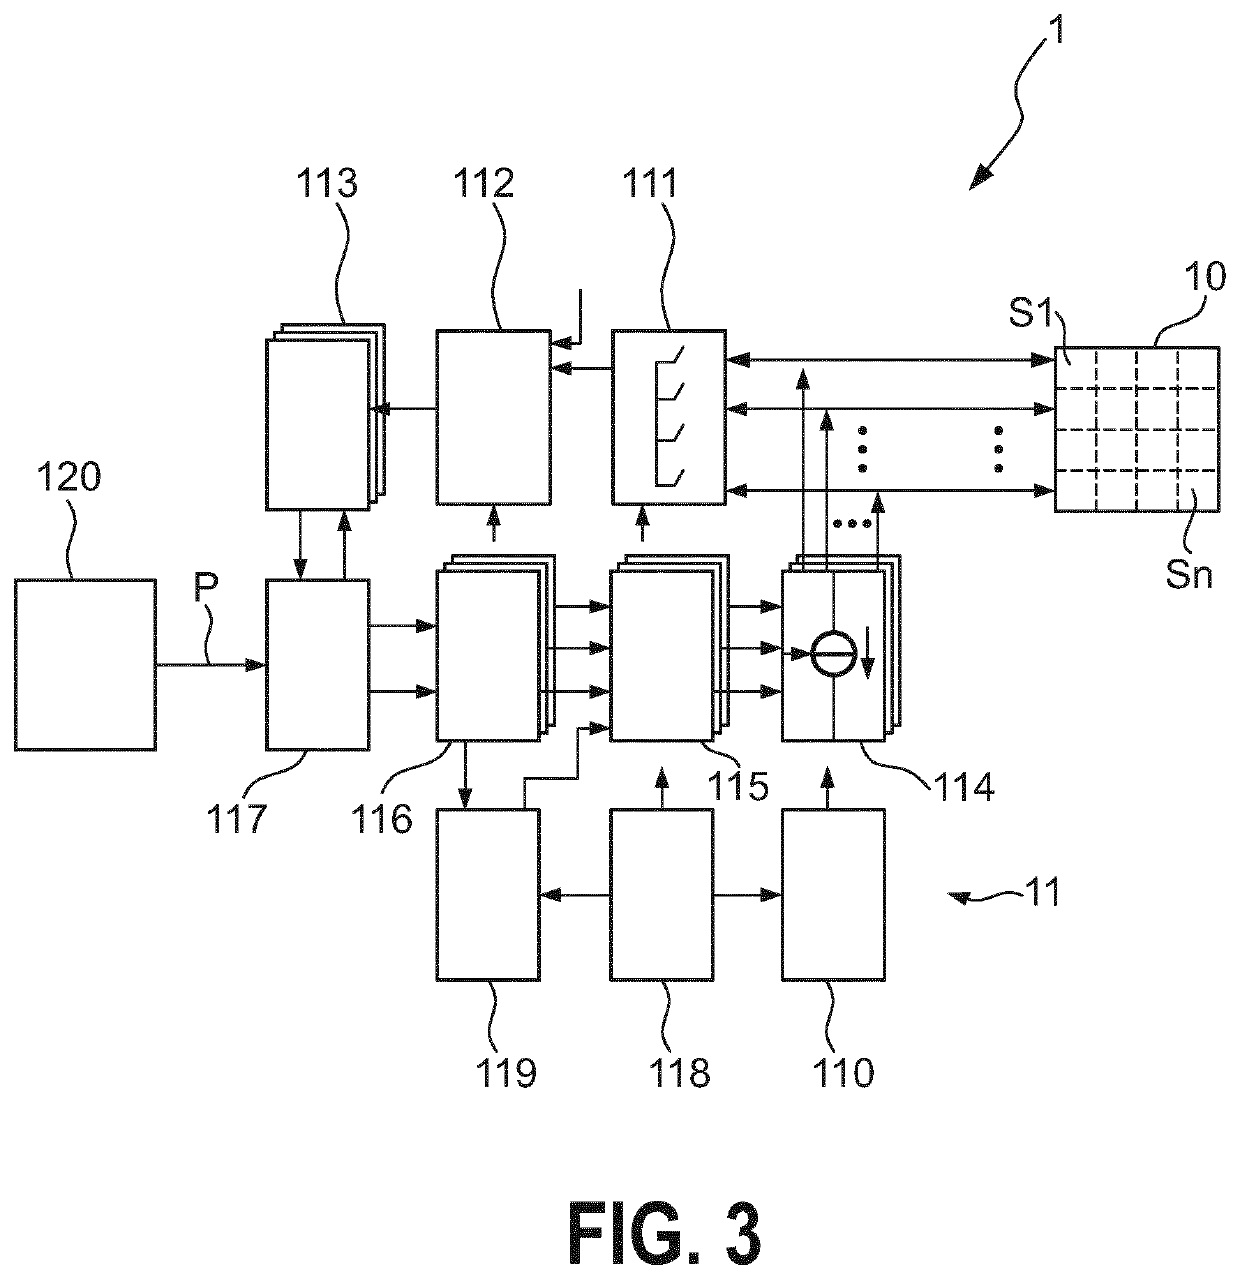 Method of controlling a segmented flash system